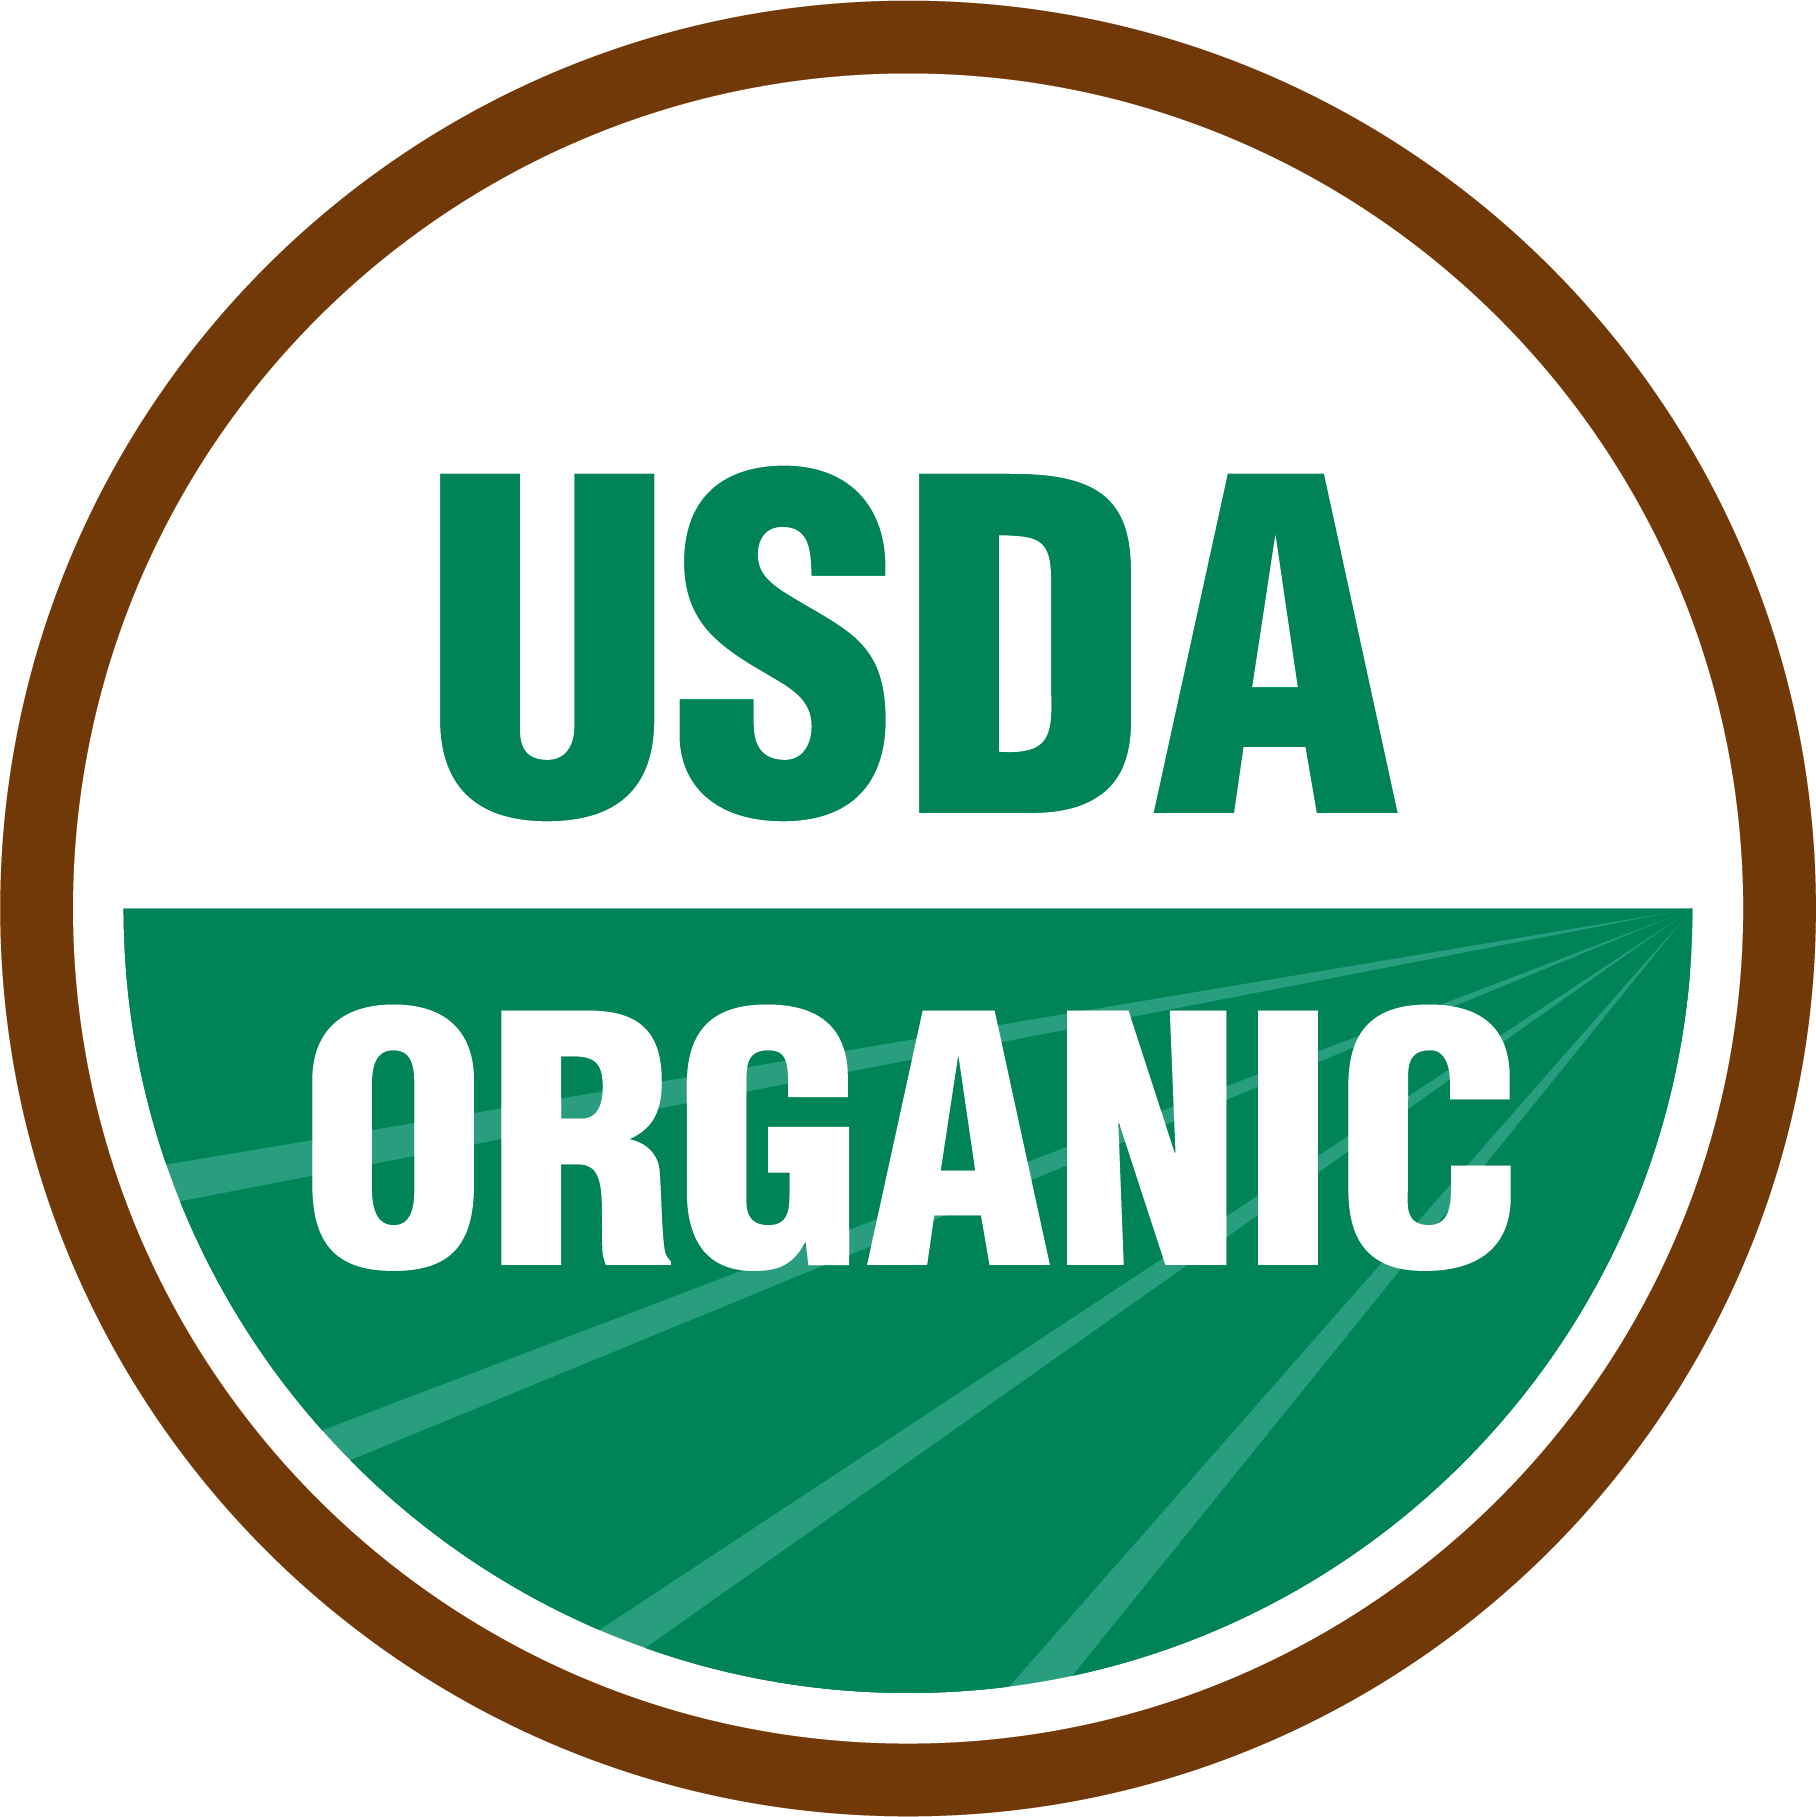 Four Color Organic Seal whitebg.png